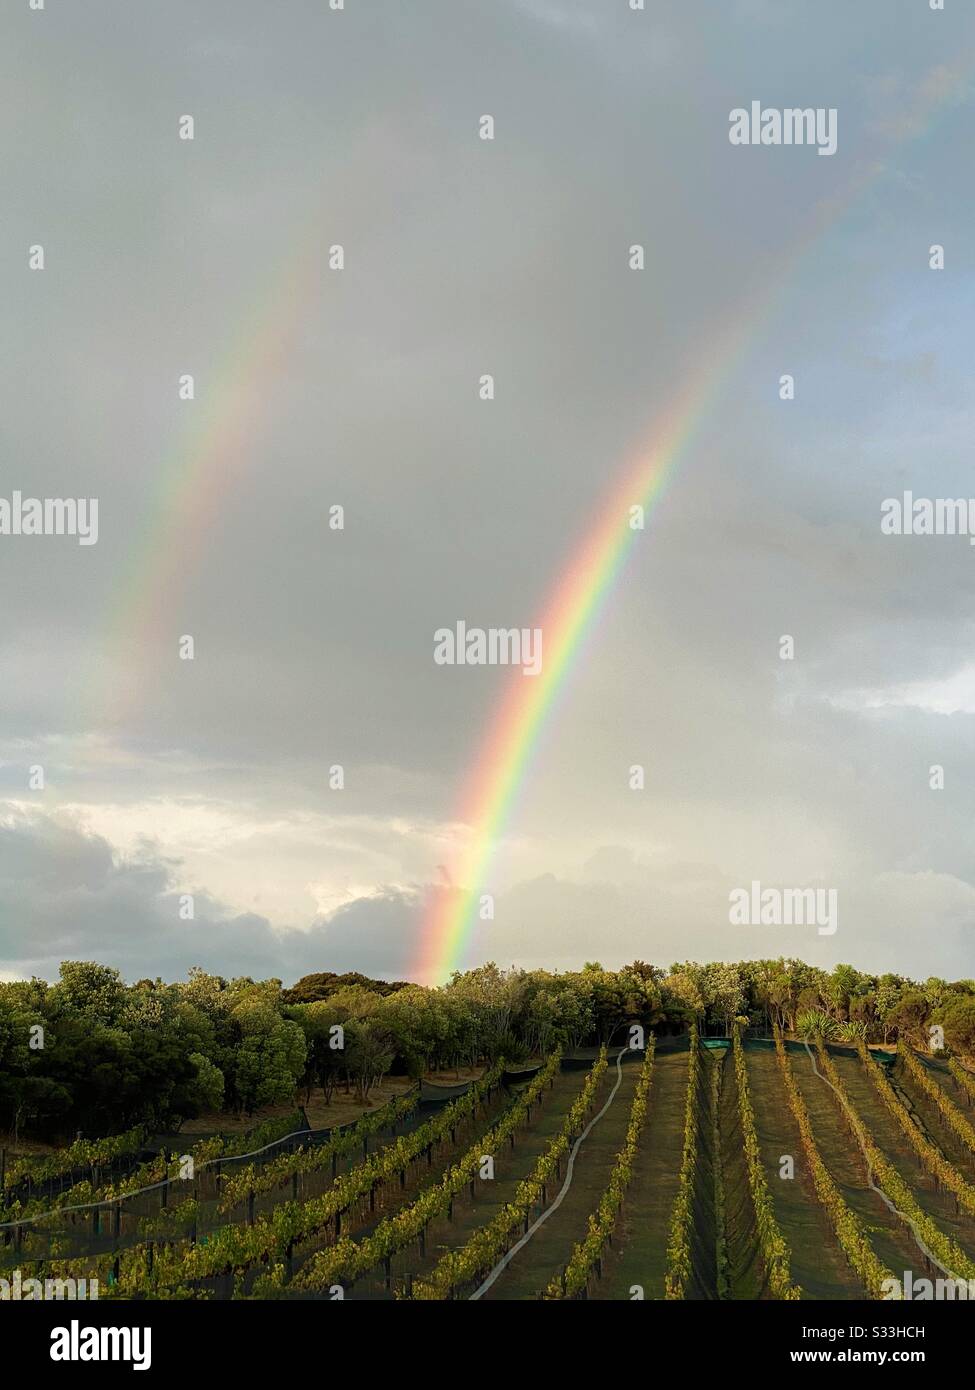 Double rainbow over rows of grape vines at a vineyard on waiheke island New Zealand at sunset. February 2020 Stock Photo